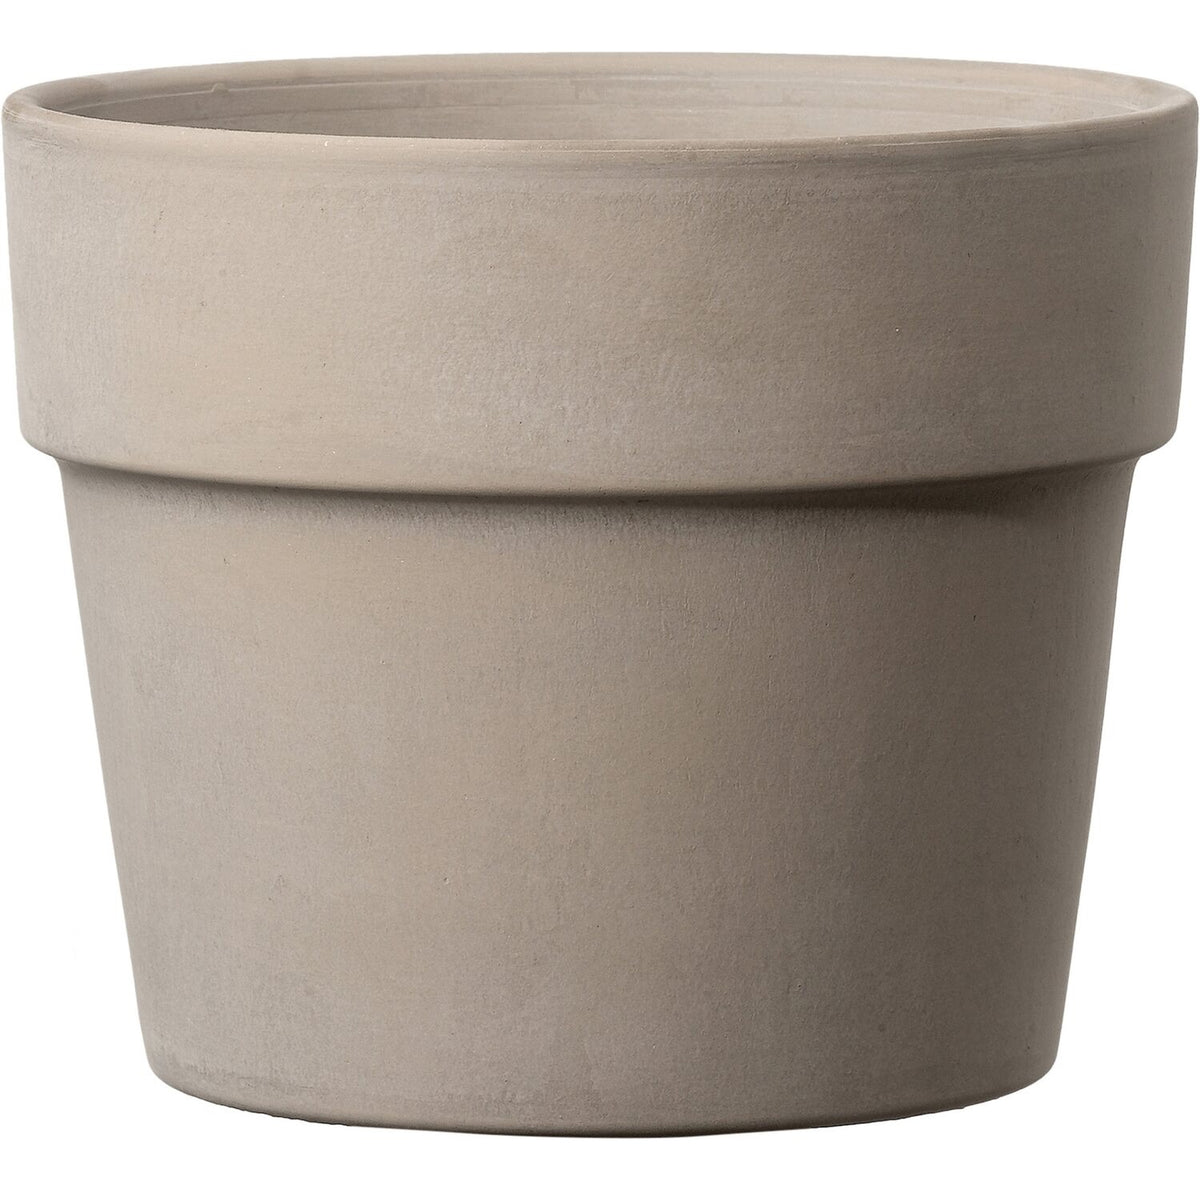 5.1"Graph Clay Cachepot